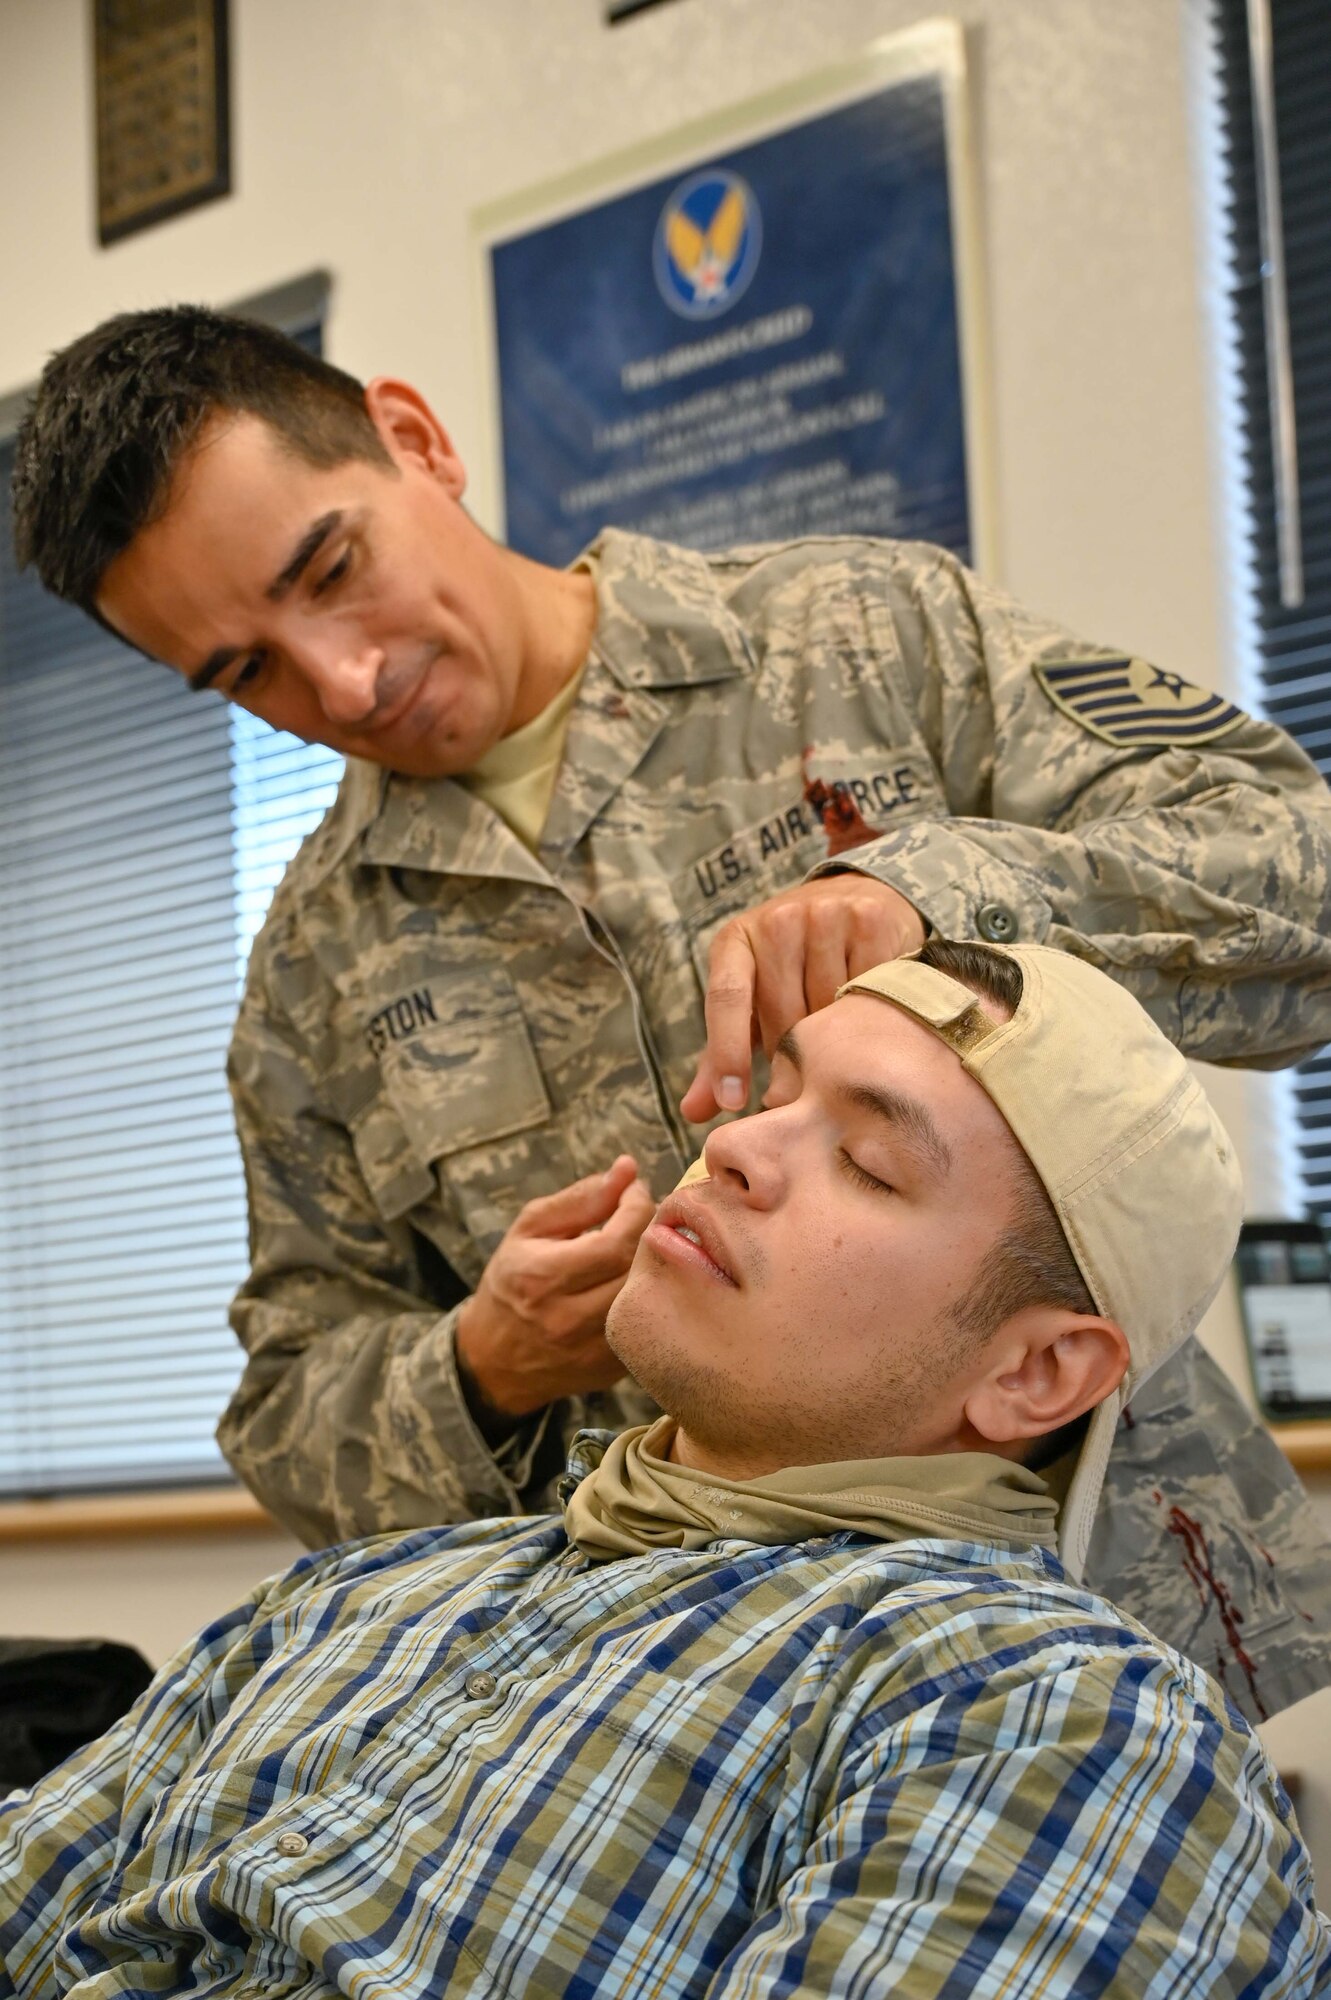 162nd Medical Group personnel prepare mock patients with simulated injuries for an “active shooter” exercise in which students from the 4-day Tactical Combat Casualty Care (TCCC) and Combat LifeSaver (CLS) courses practiced their new skills.